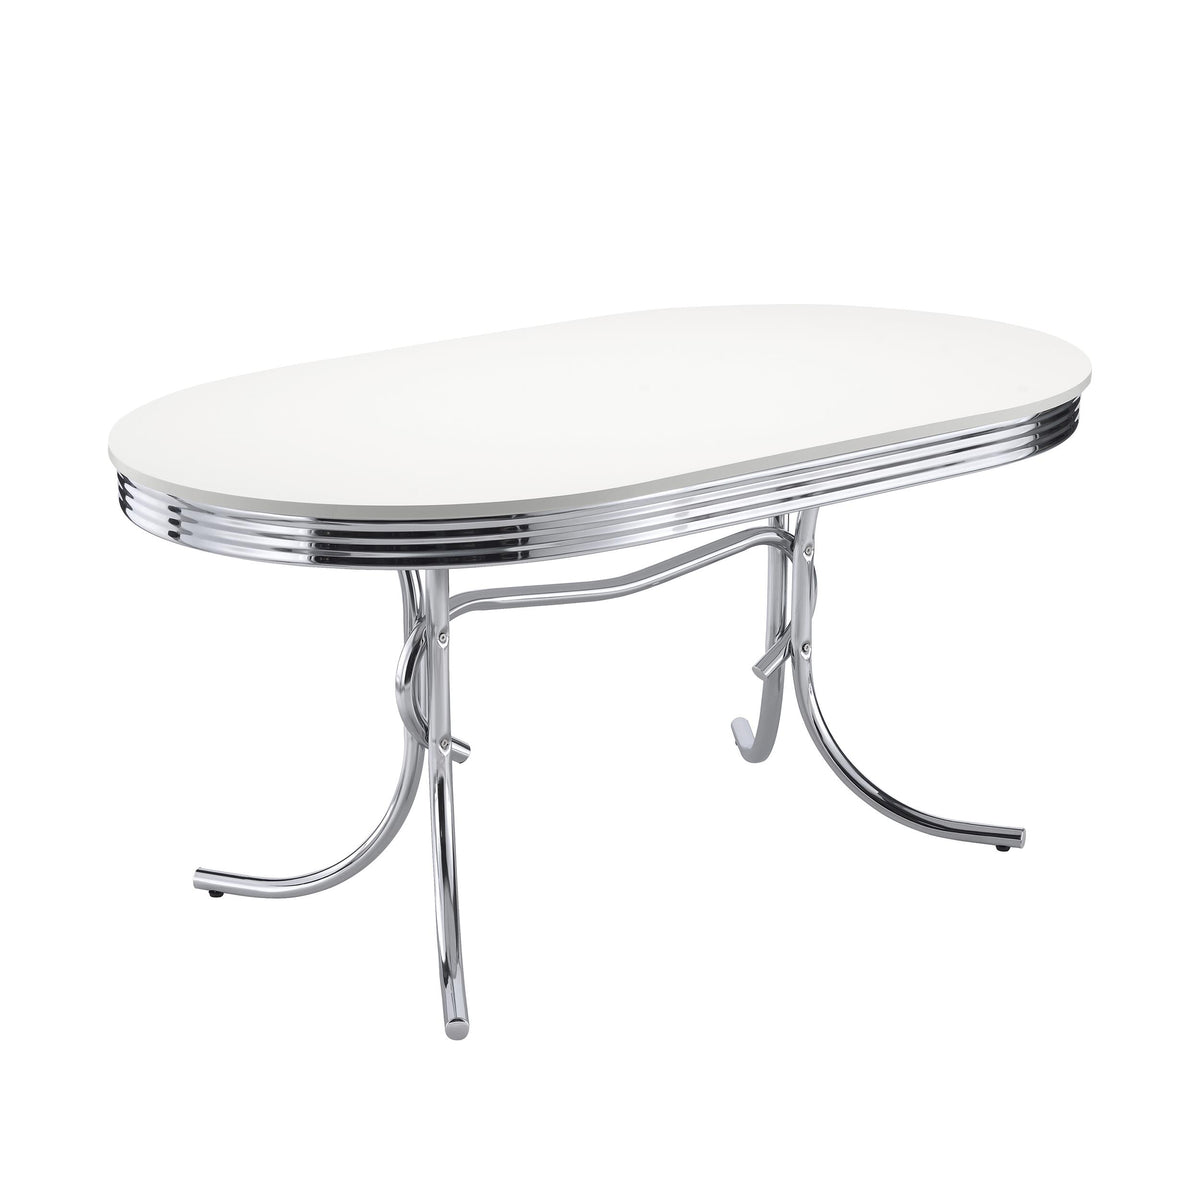 Retro Oval Dining Table Glossy White and Chrome Retro Oval Dining Table Glossy White and Chrome Half Price Furniture